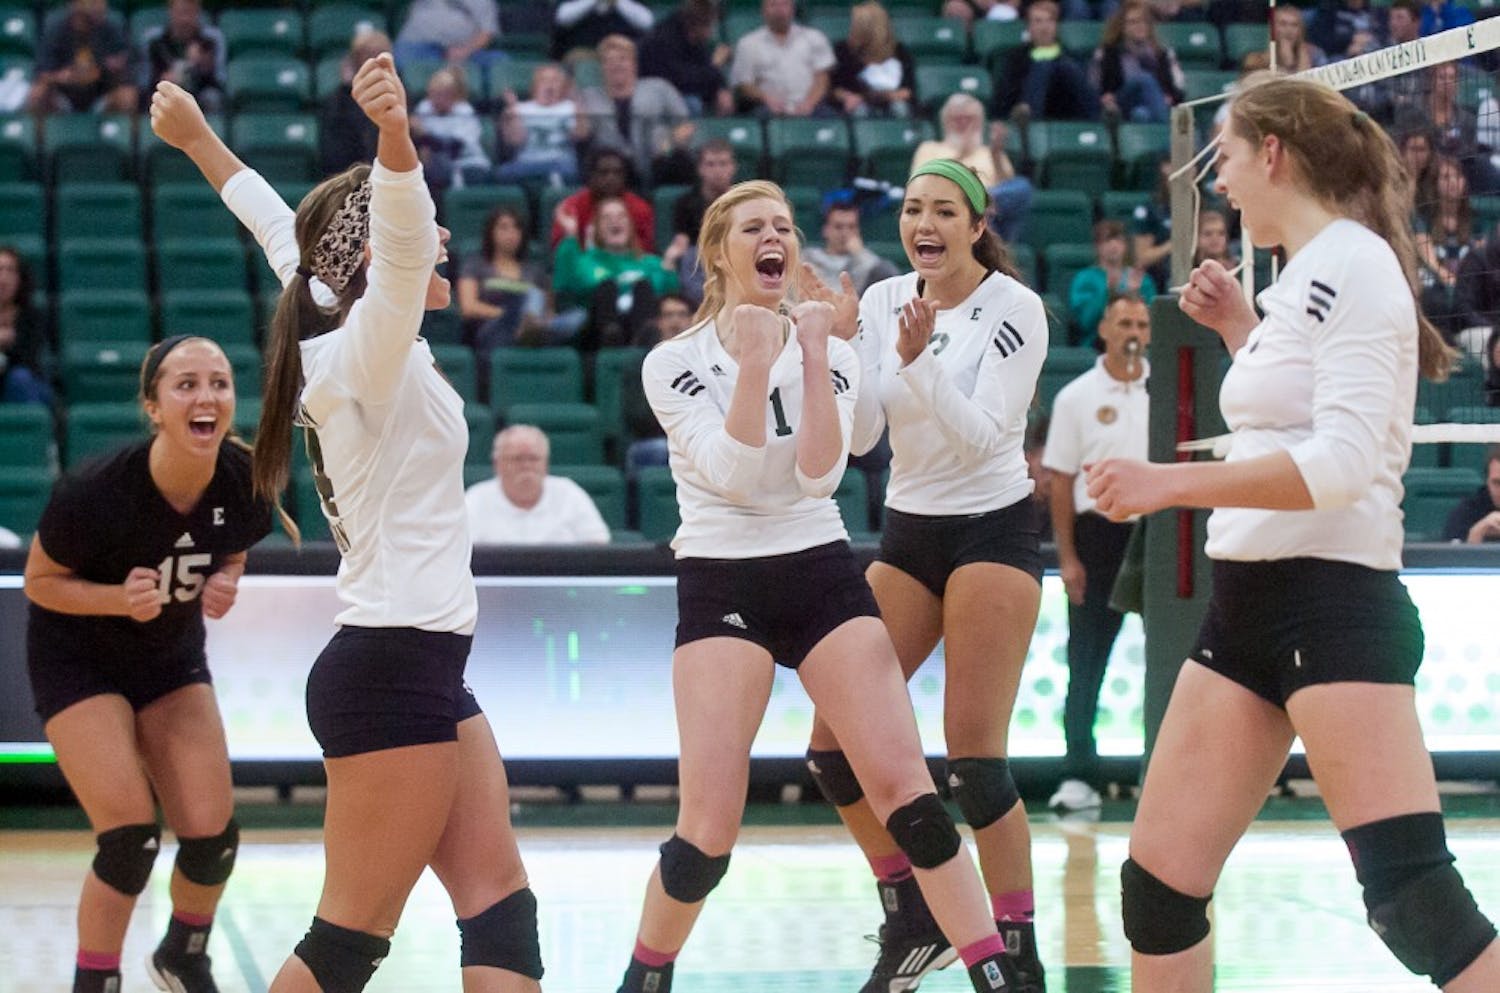 The Eastern Michigan volleyball team celebrates winning a set during the Eagles' loss to Northern Illinois on 10 October at the Convocation Center in Ypsilanti.